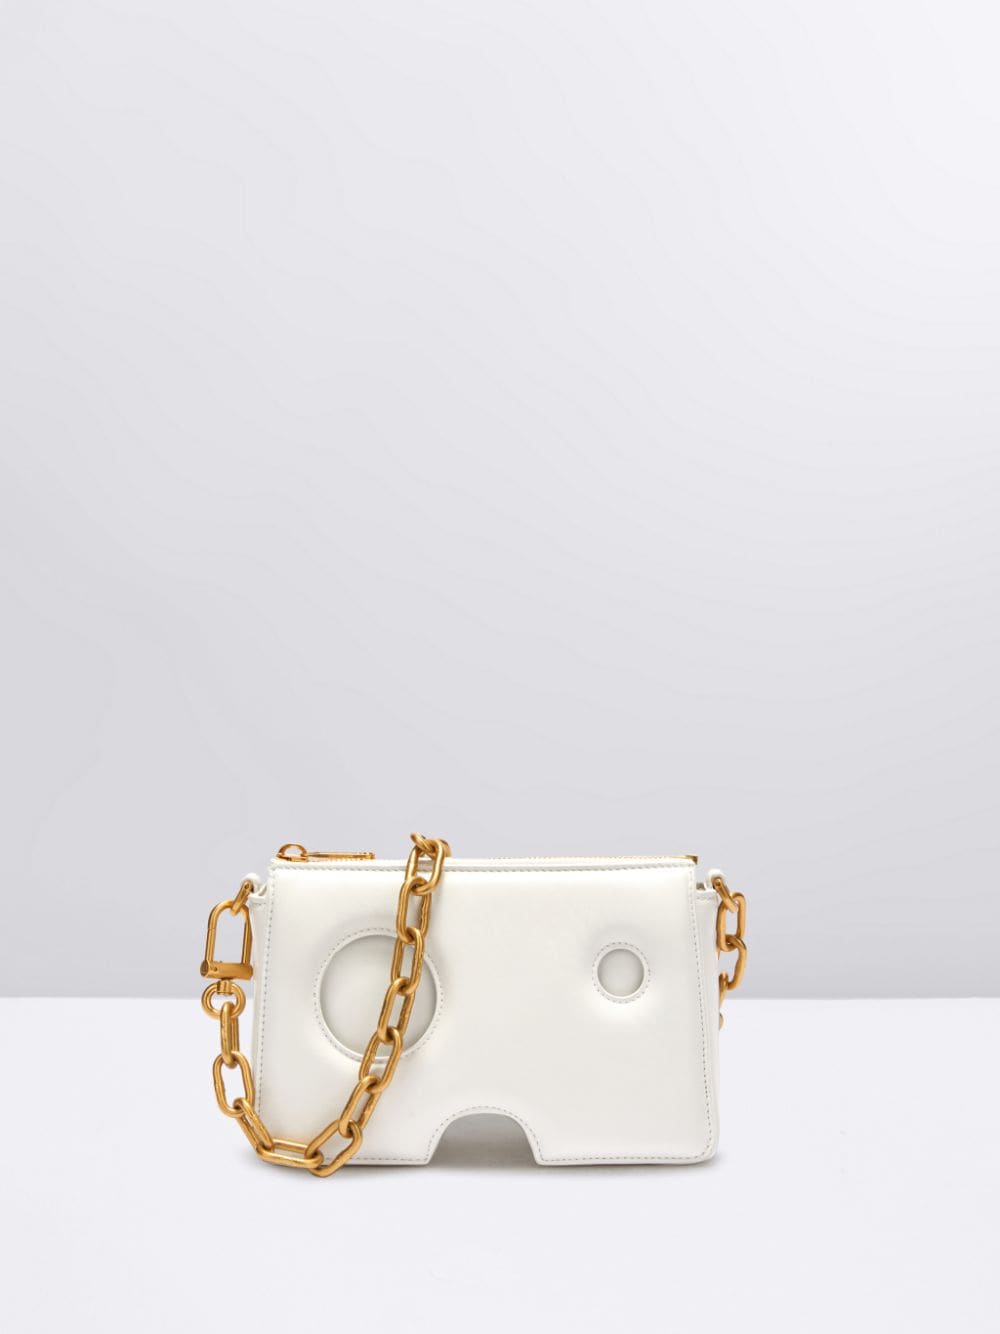 BURROW ZIPPED POUCH in white